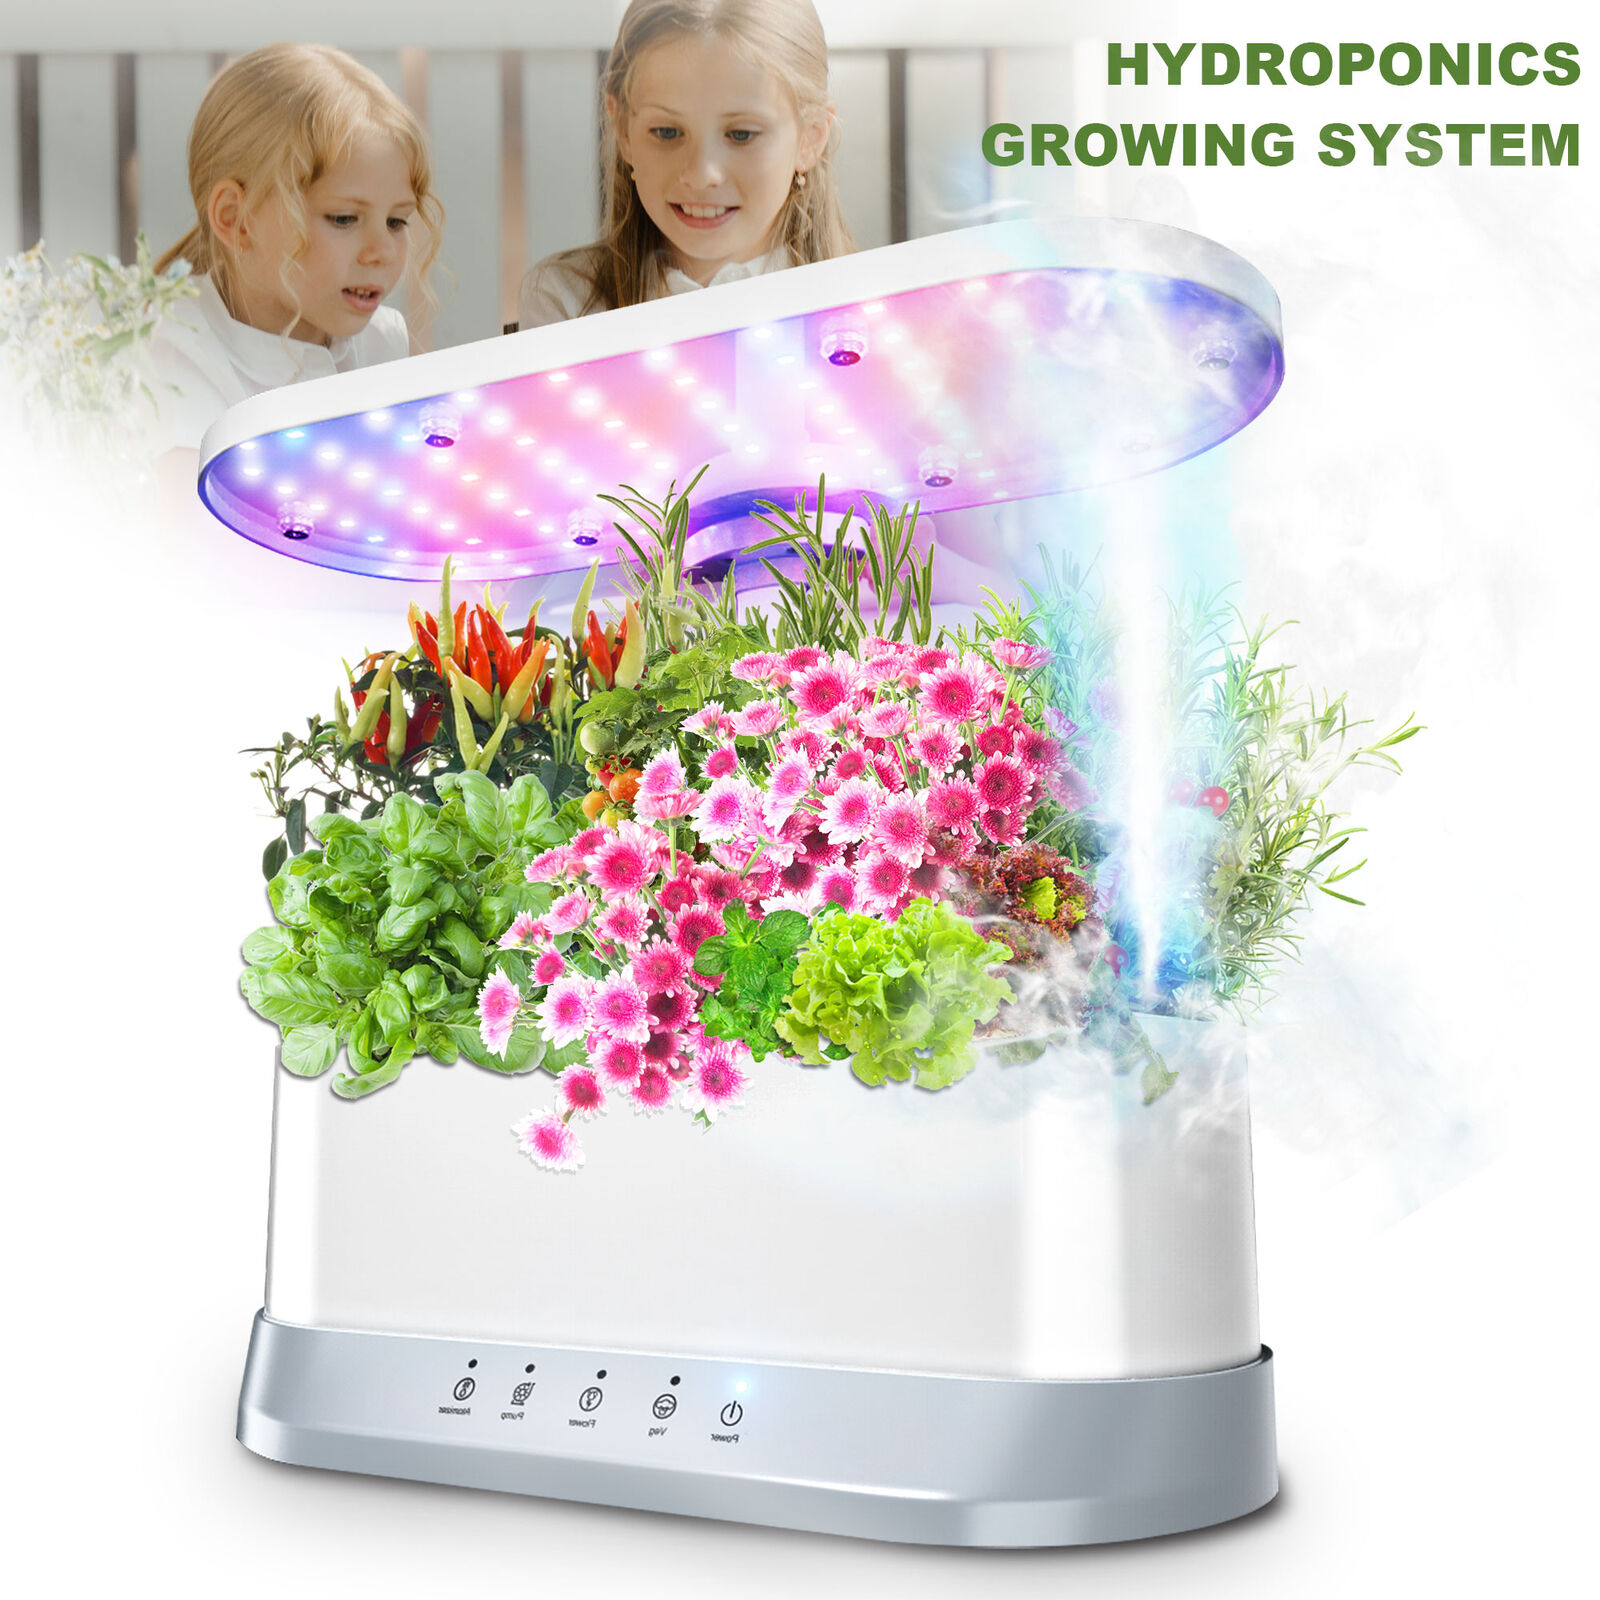 11 Pods Hydroponics Growing System with LED Grow Light for Home Kitchen